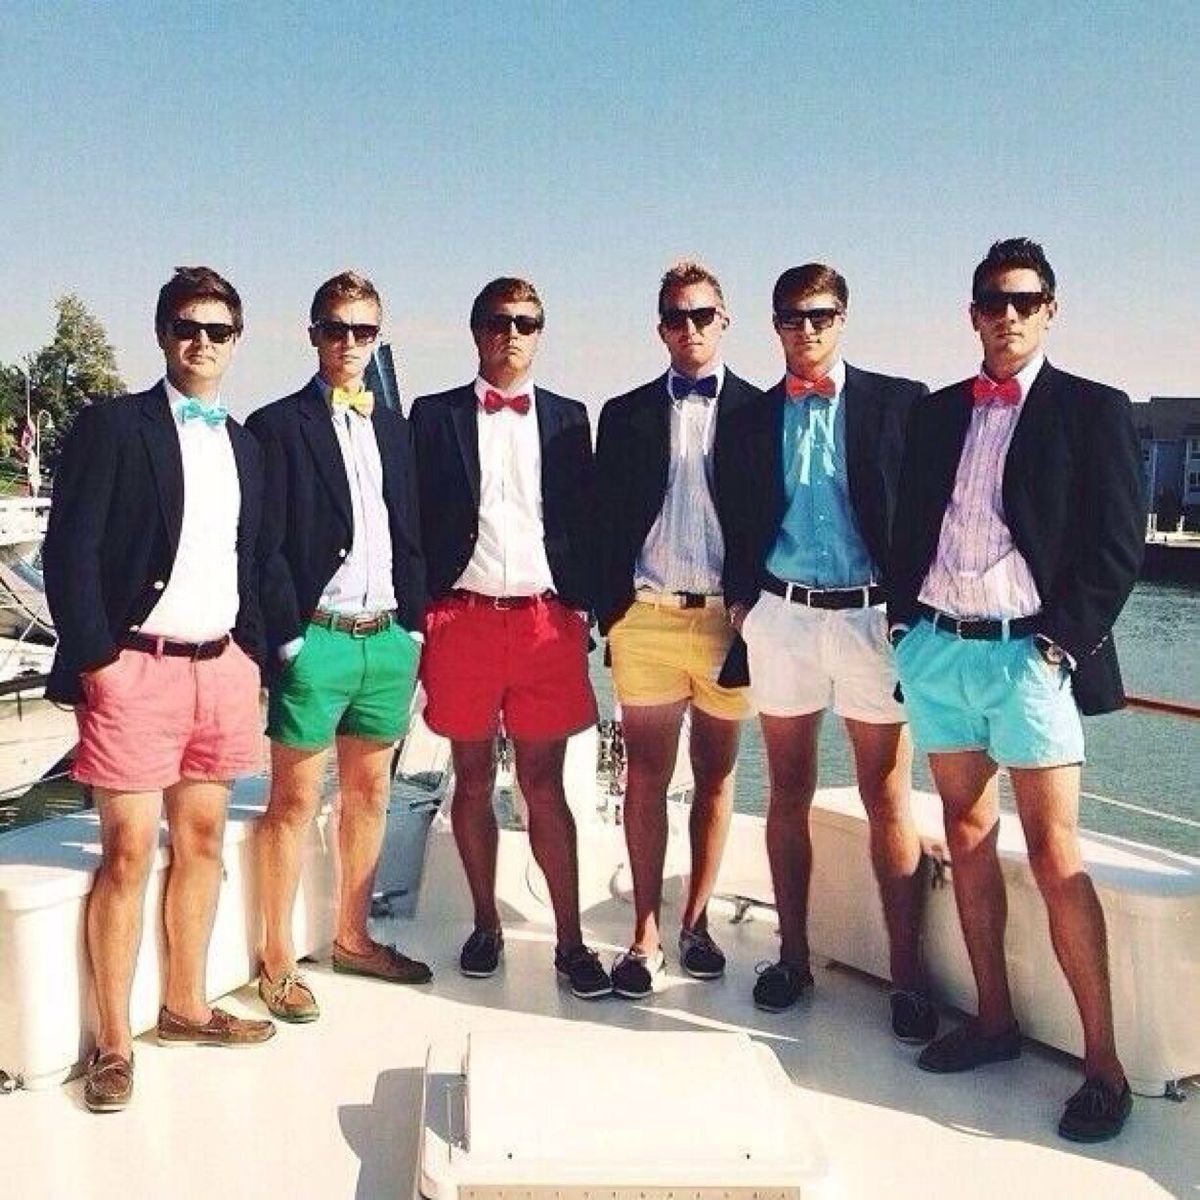 A College Gentleman's Guide To Frattire